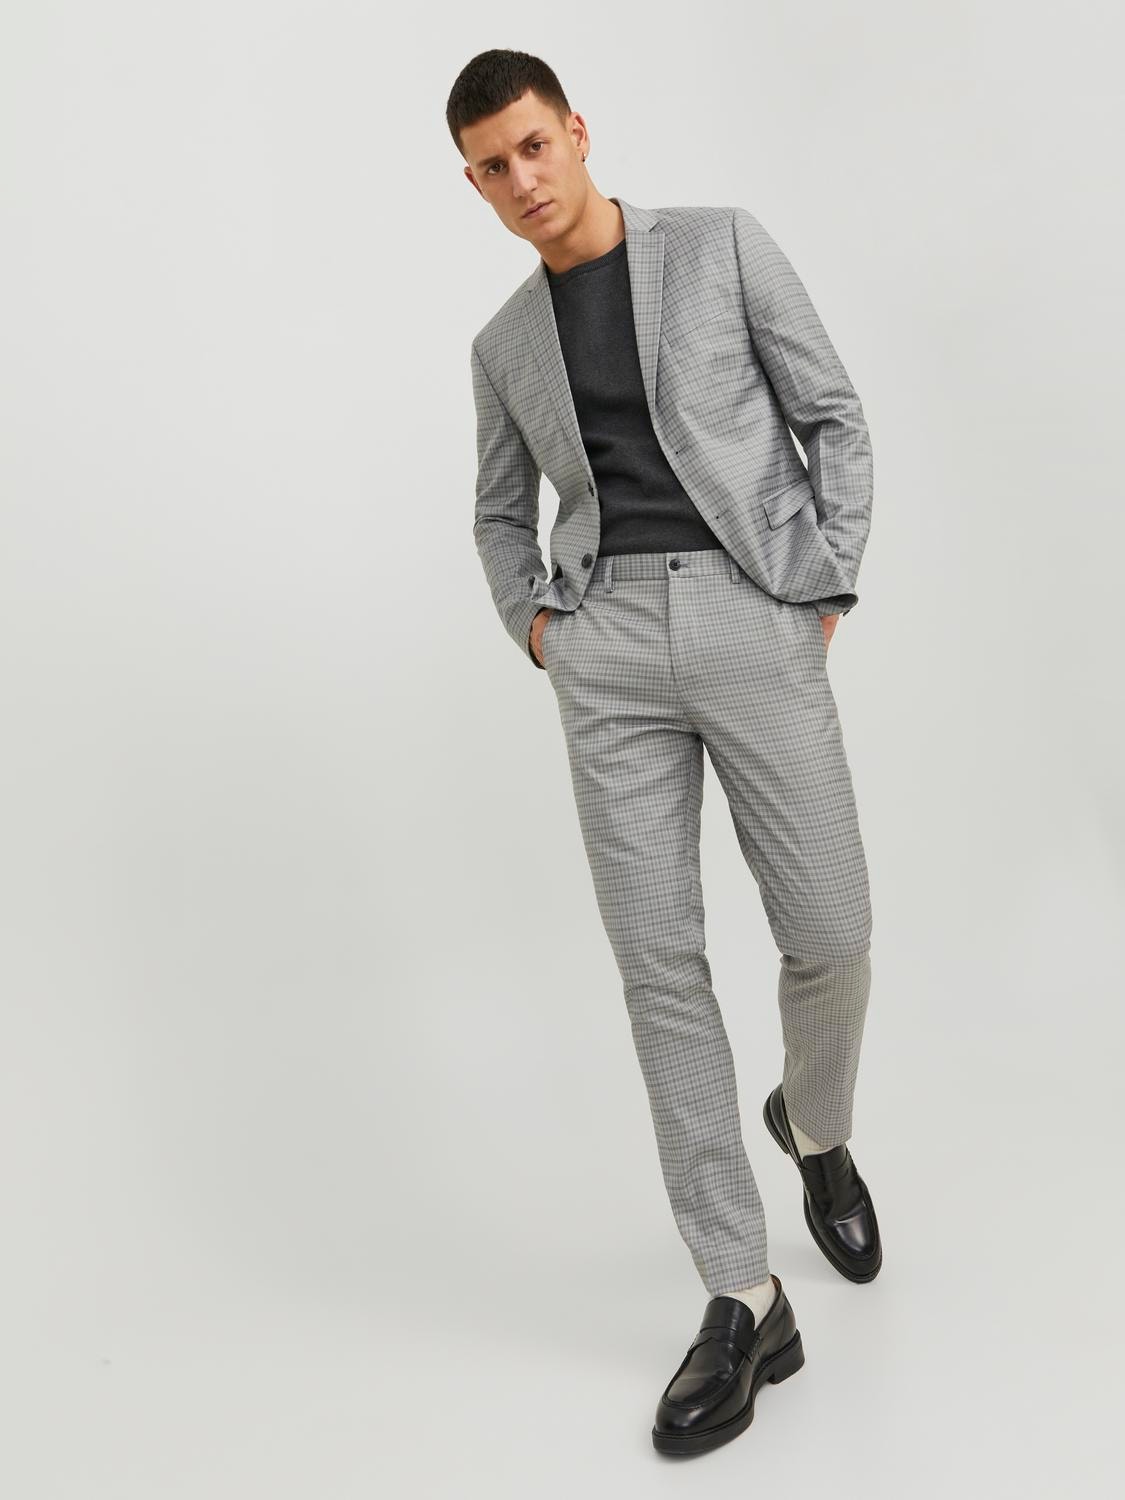 Vila relaxed tailored blazer vest and pants 3 piece set in gray melange